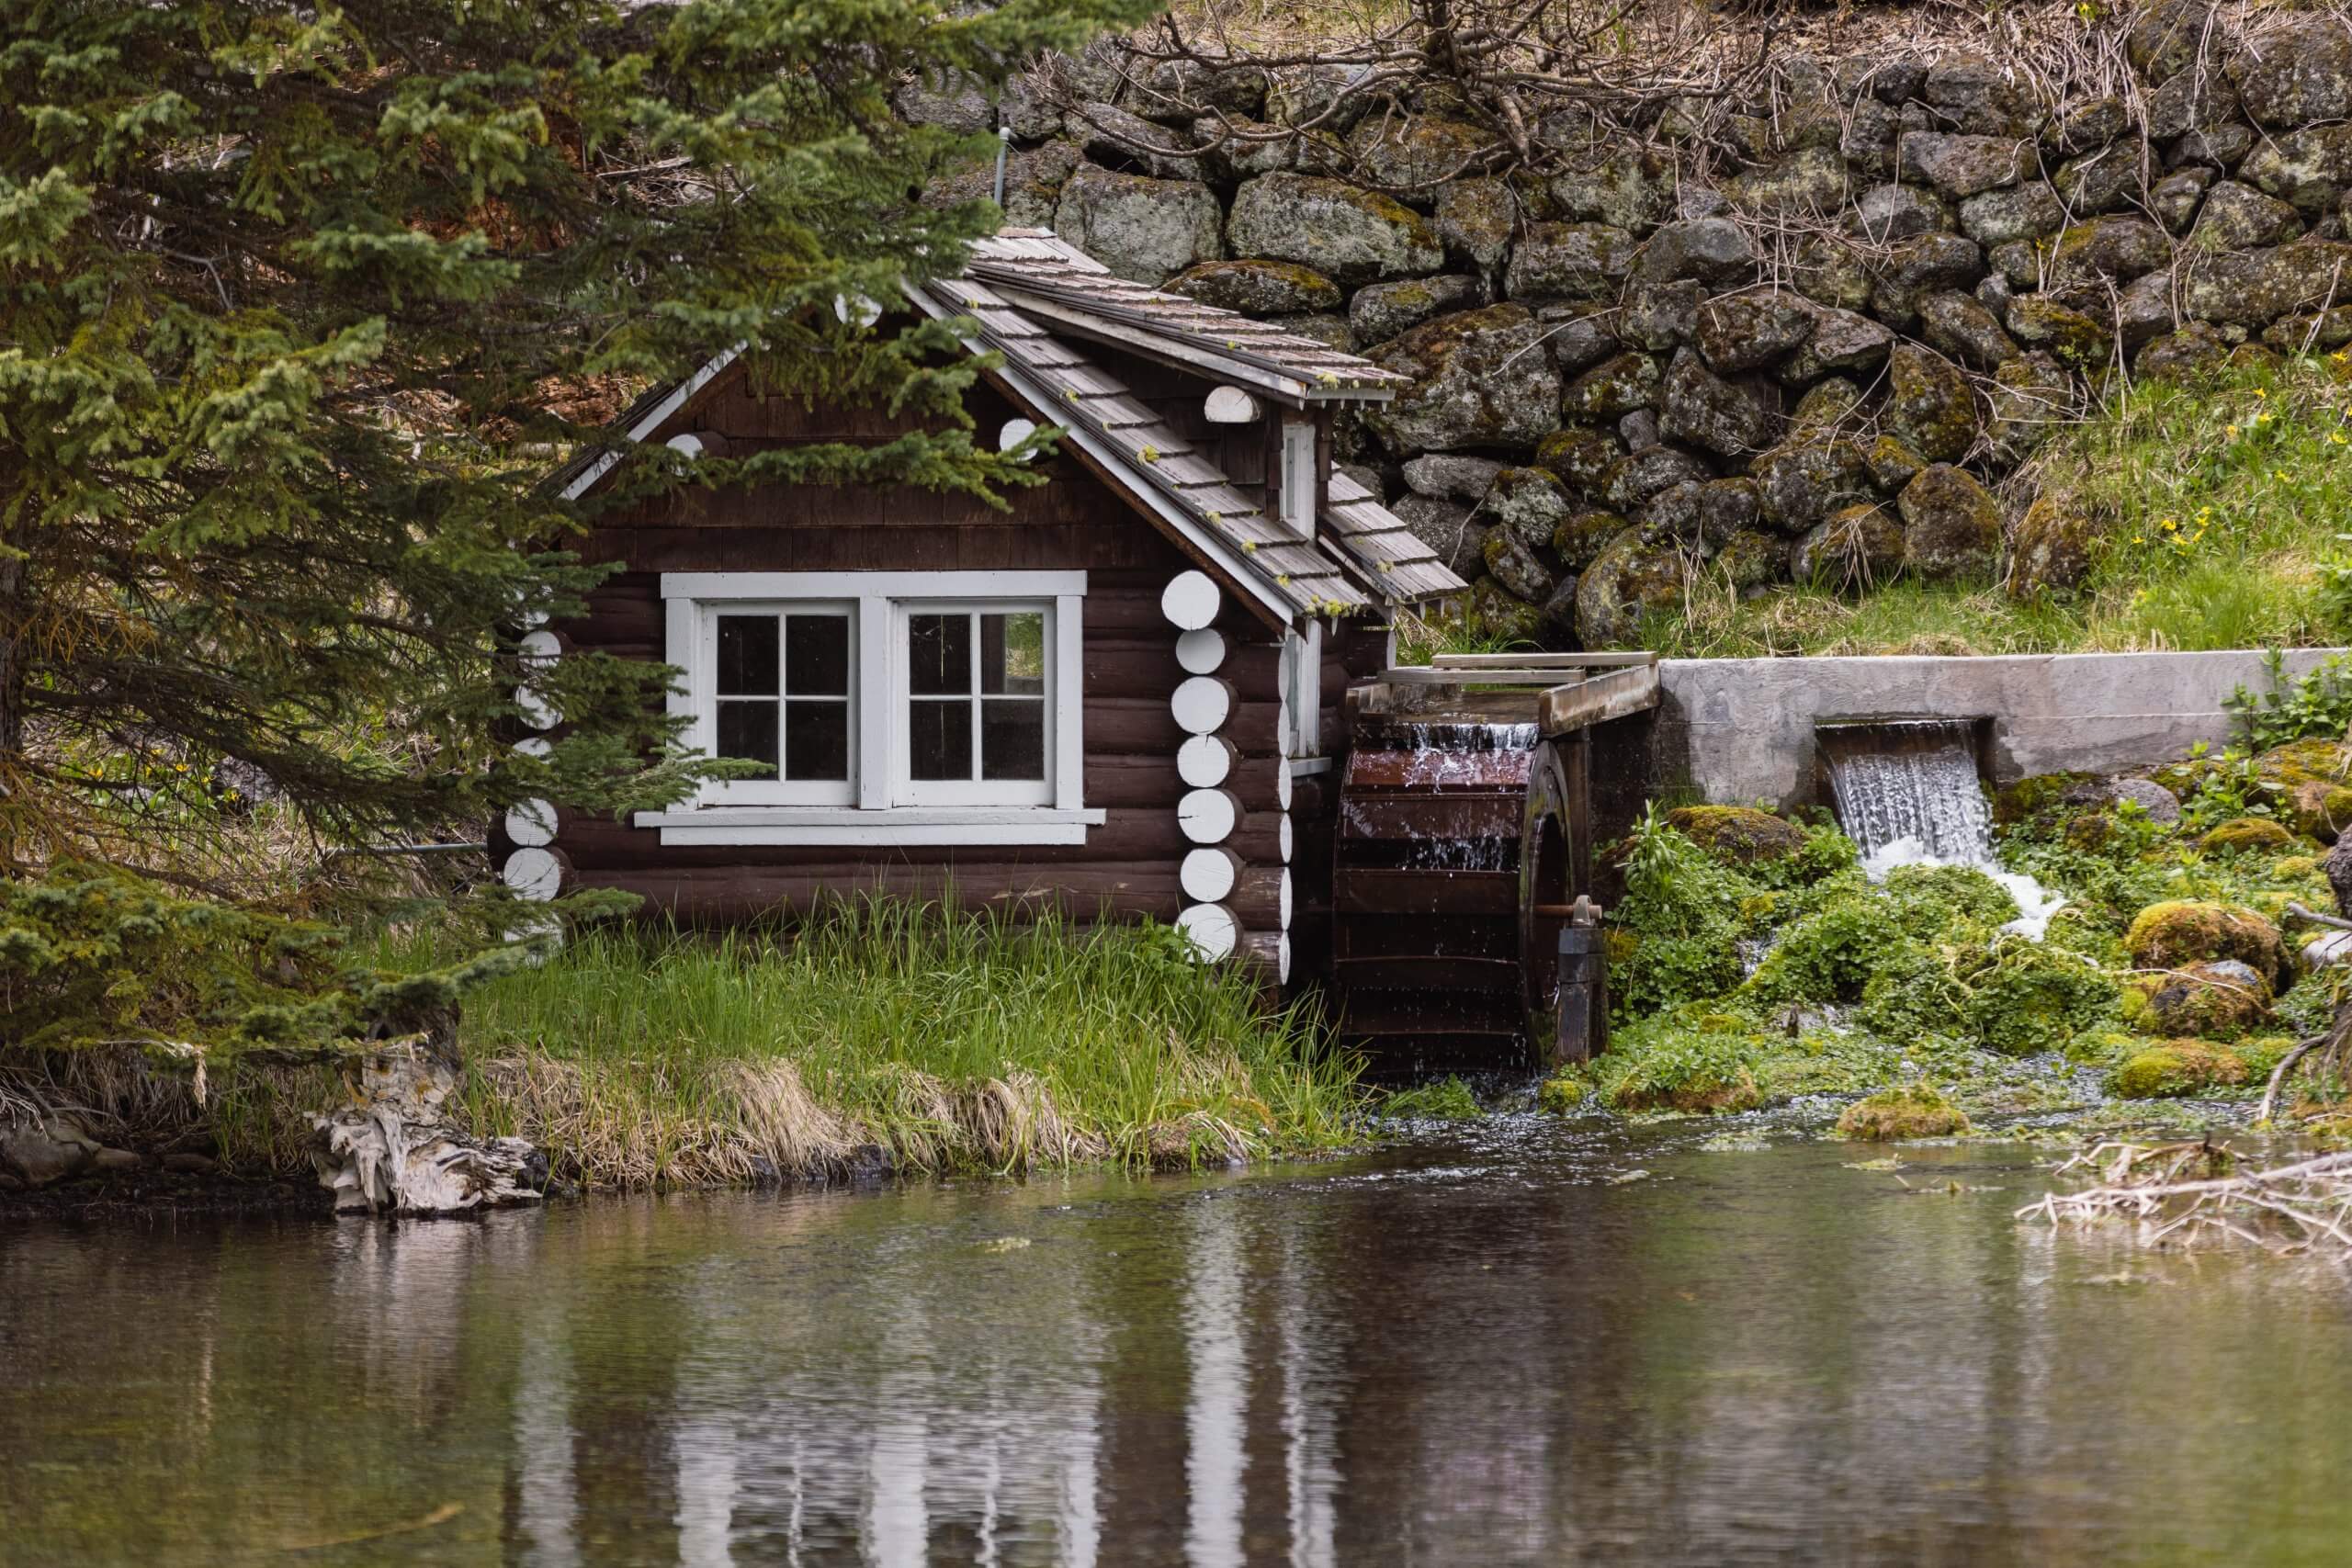 An old log cabin with a water wheel next to a stream.